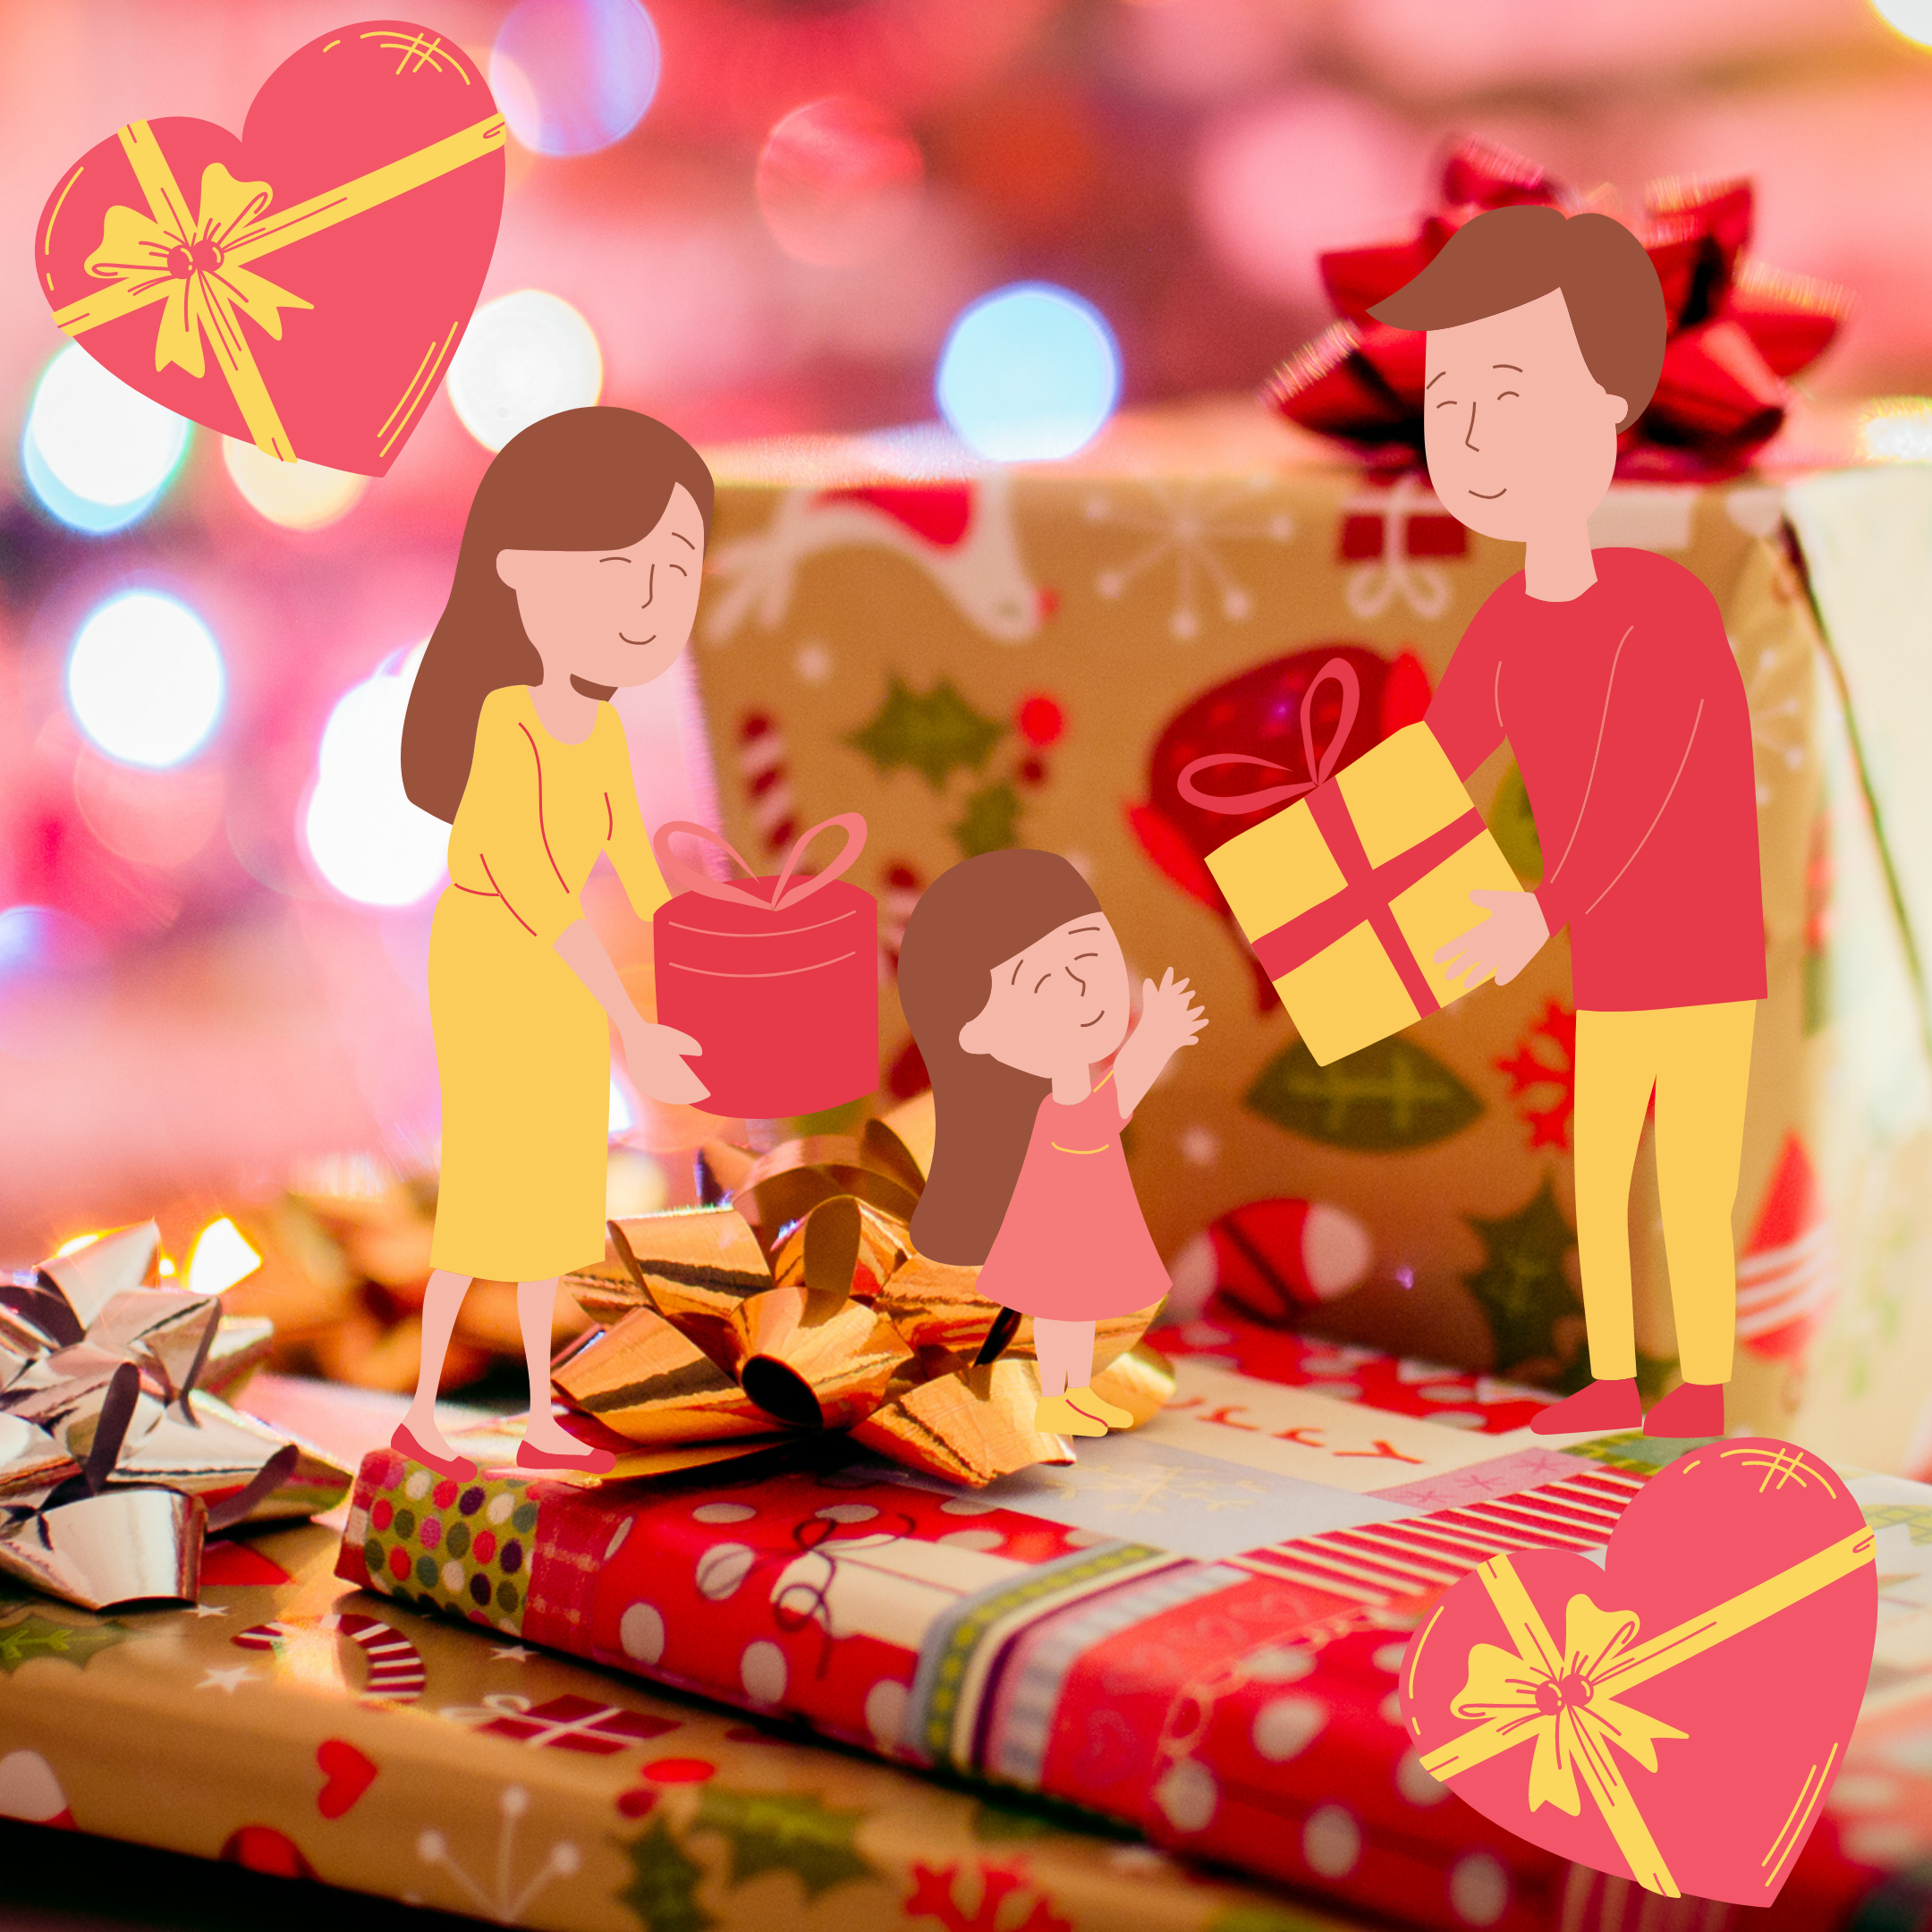 Reasons why gift giving is a wonderful action to do?